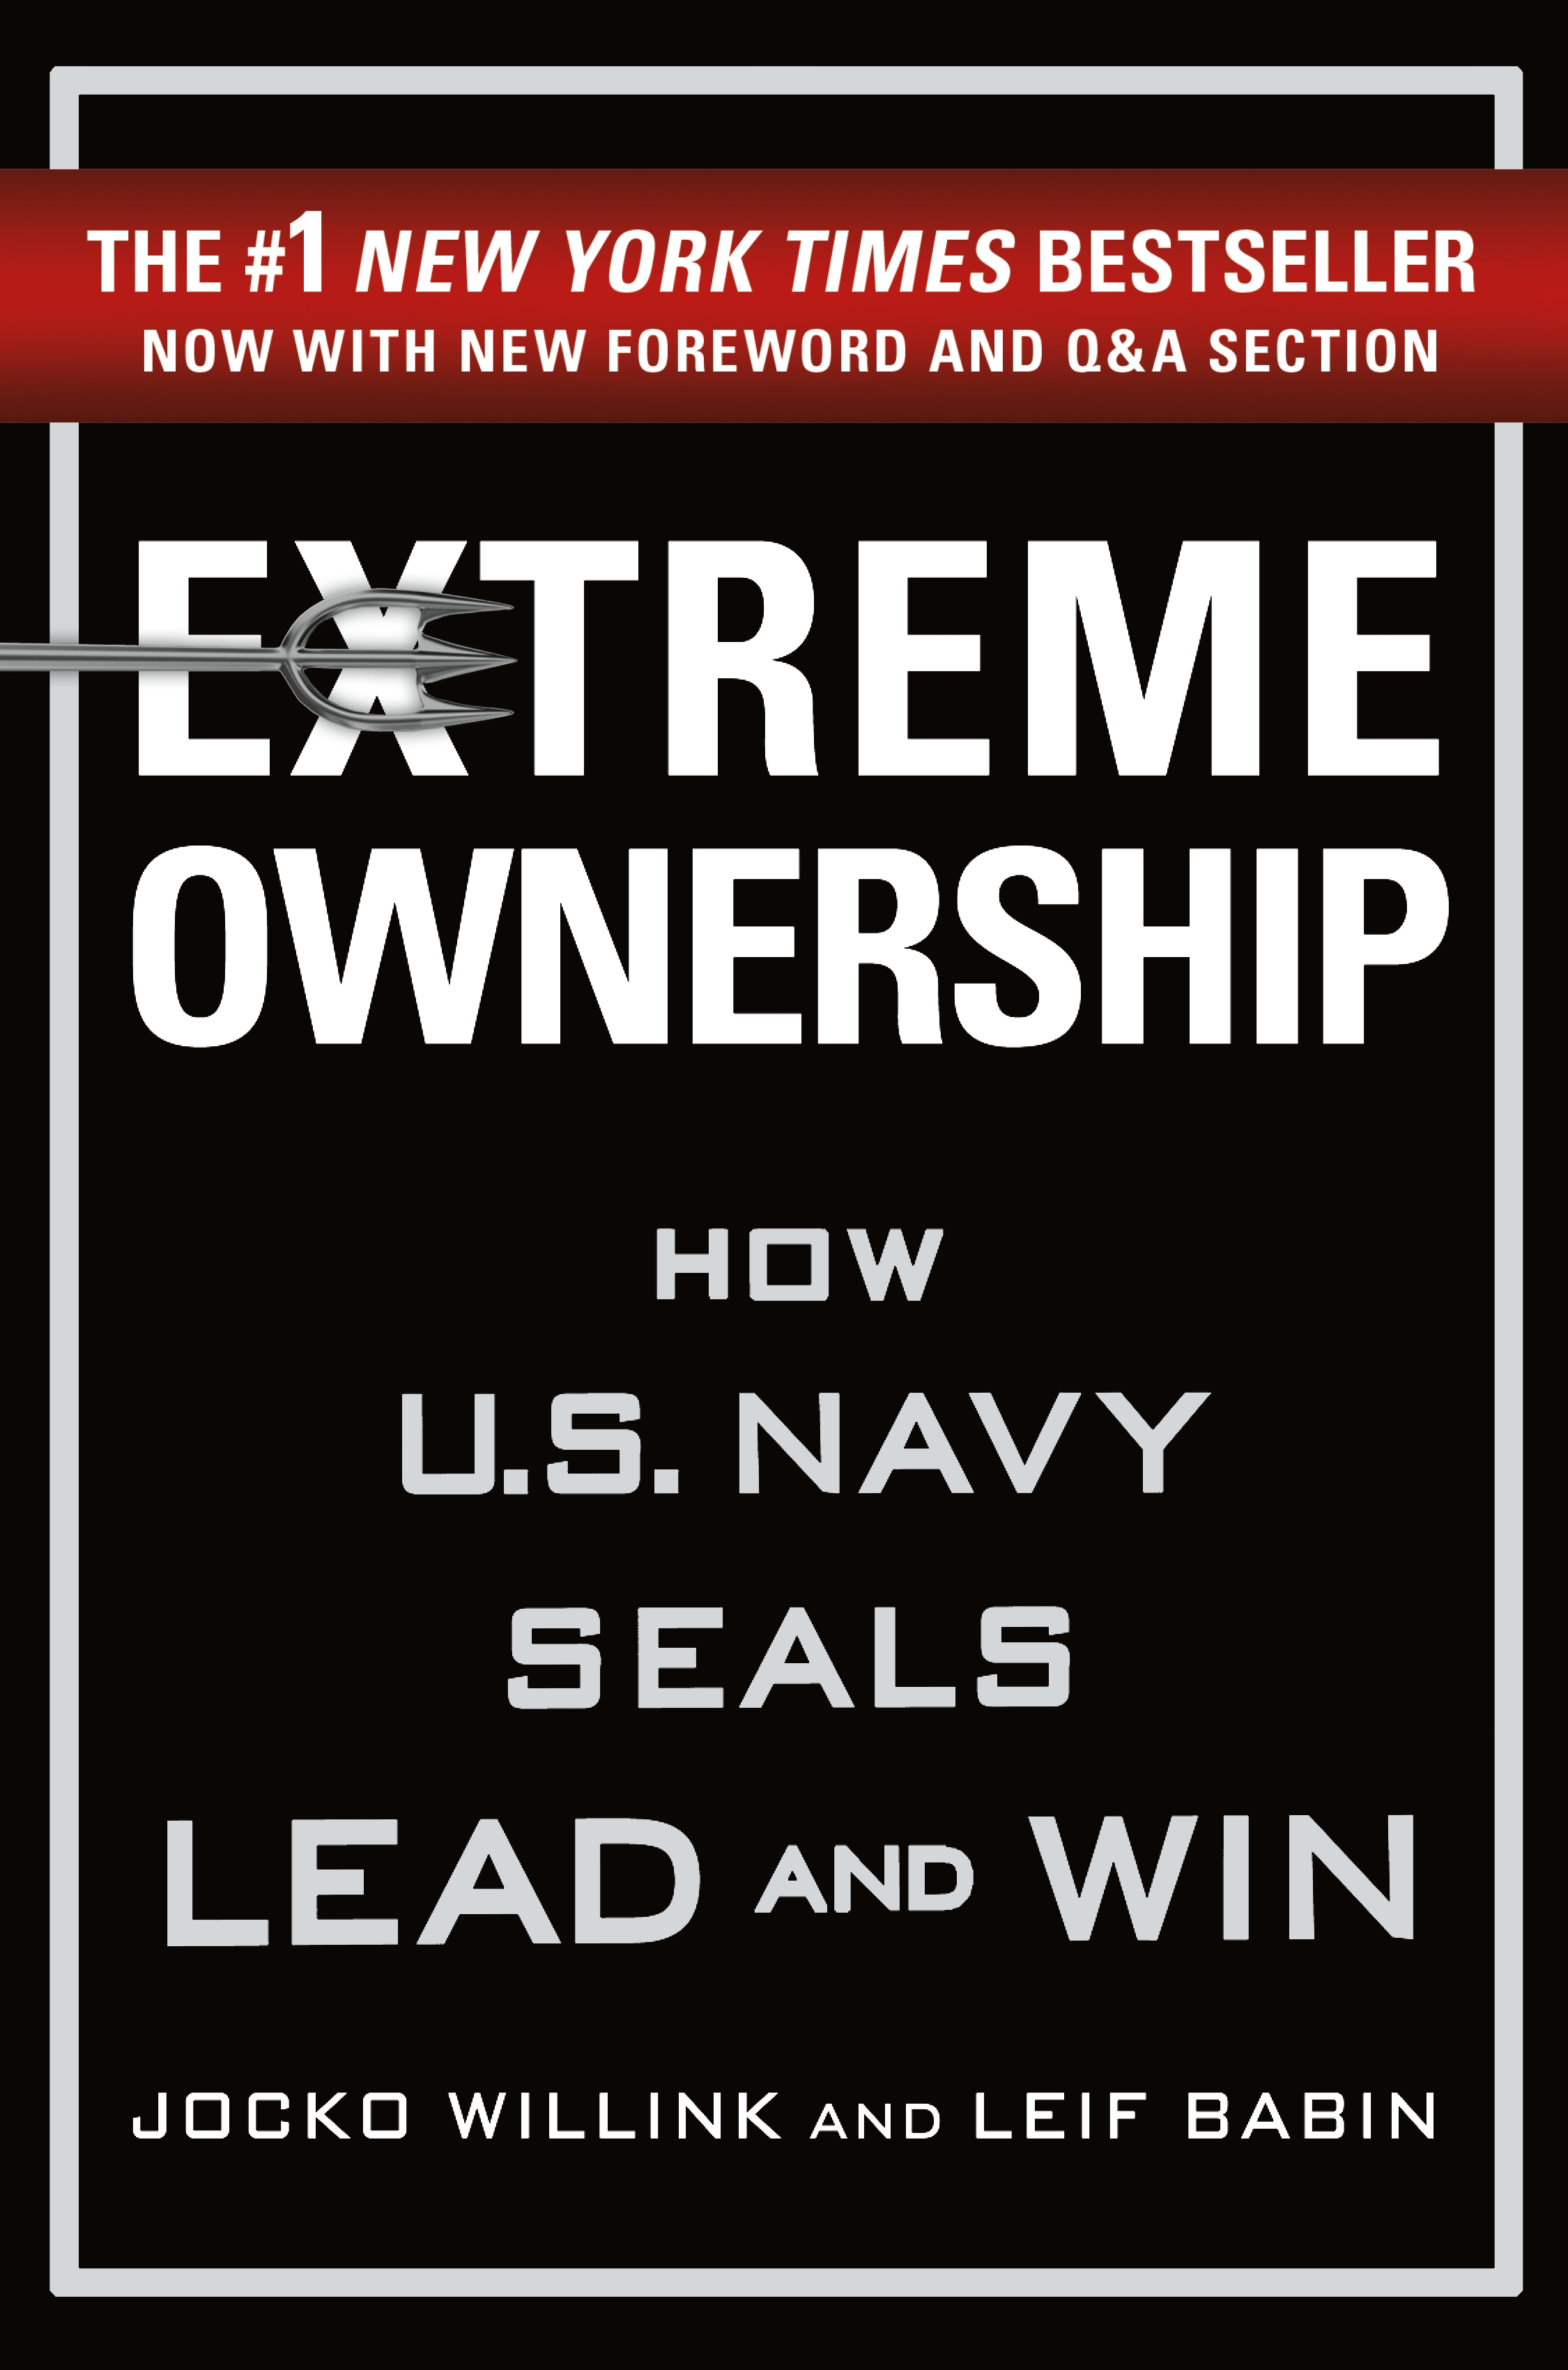 Extreme Ownership : How U.S. Navy SEALs Lead and Win (New Edition) (Hardcover) - image 1 of 2